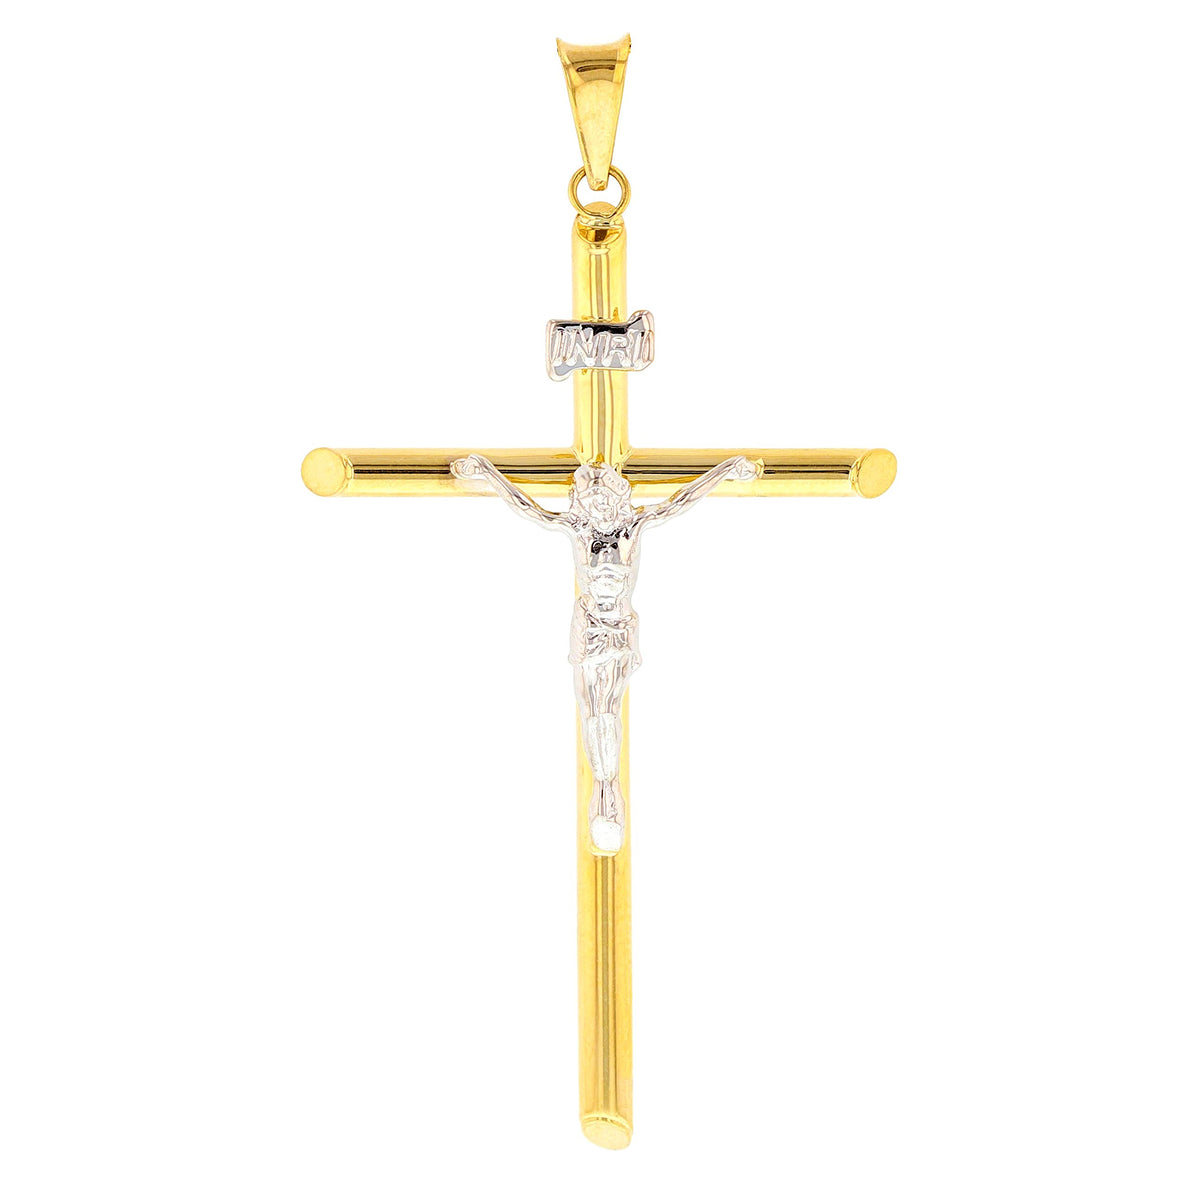 Religious by Jewelry America 14K Two Tone Gold Large Tube Cross INRI Crucifix Pendant